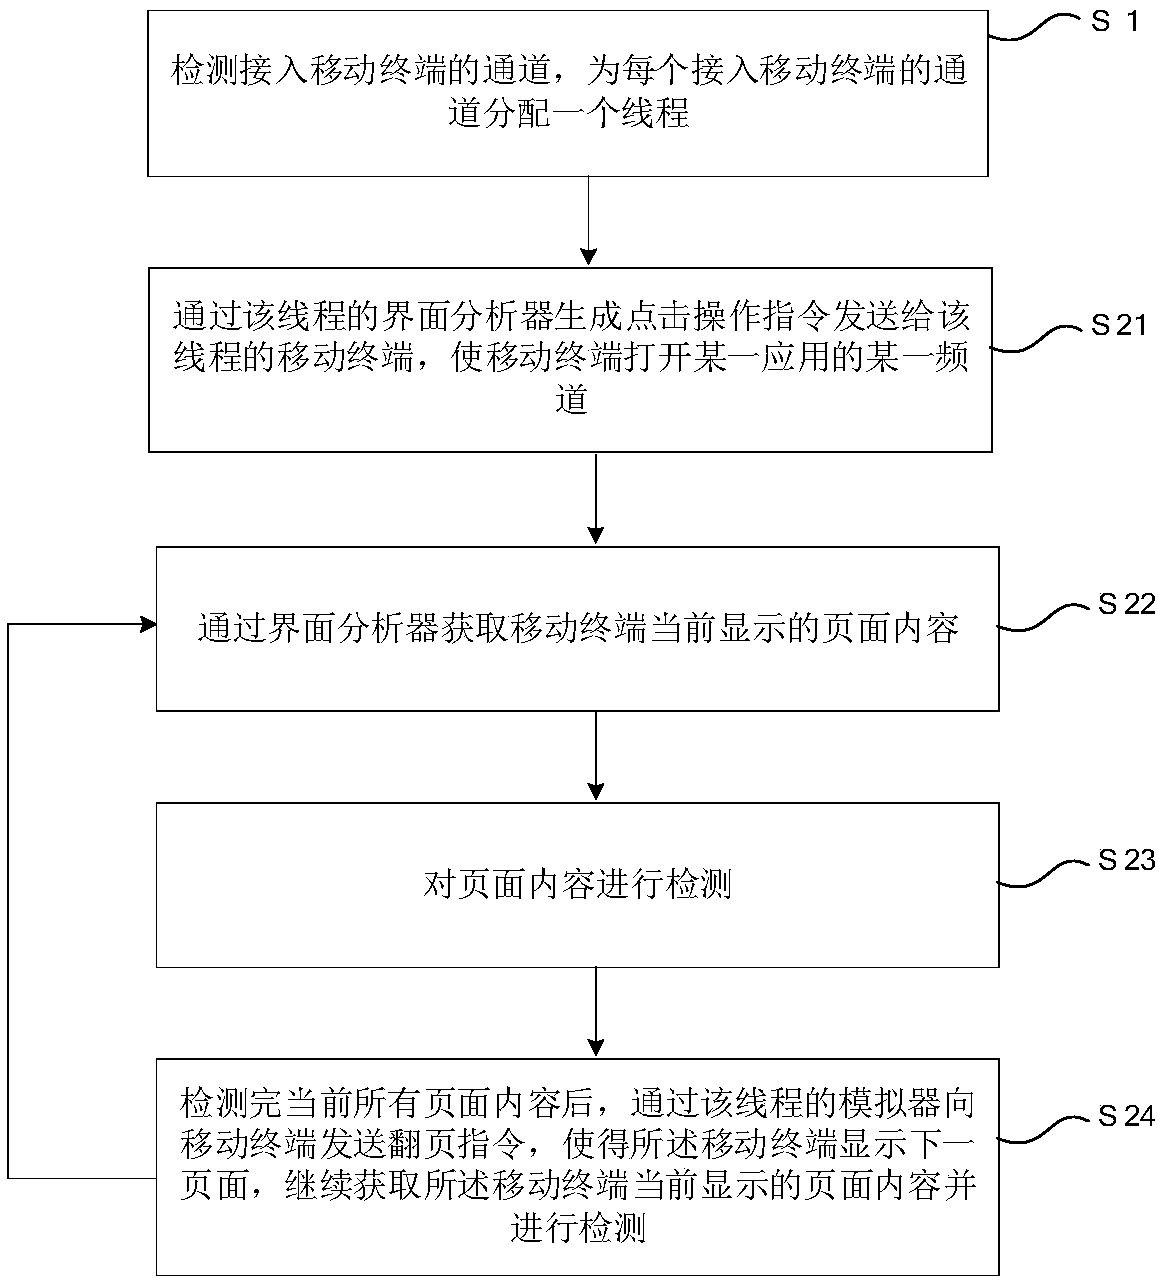 Multi-thread monitoring method and system for monitoring application of mobile terminal